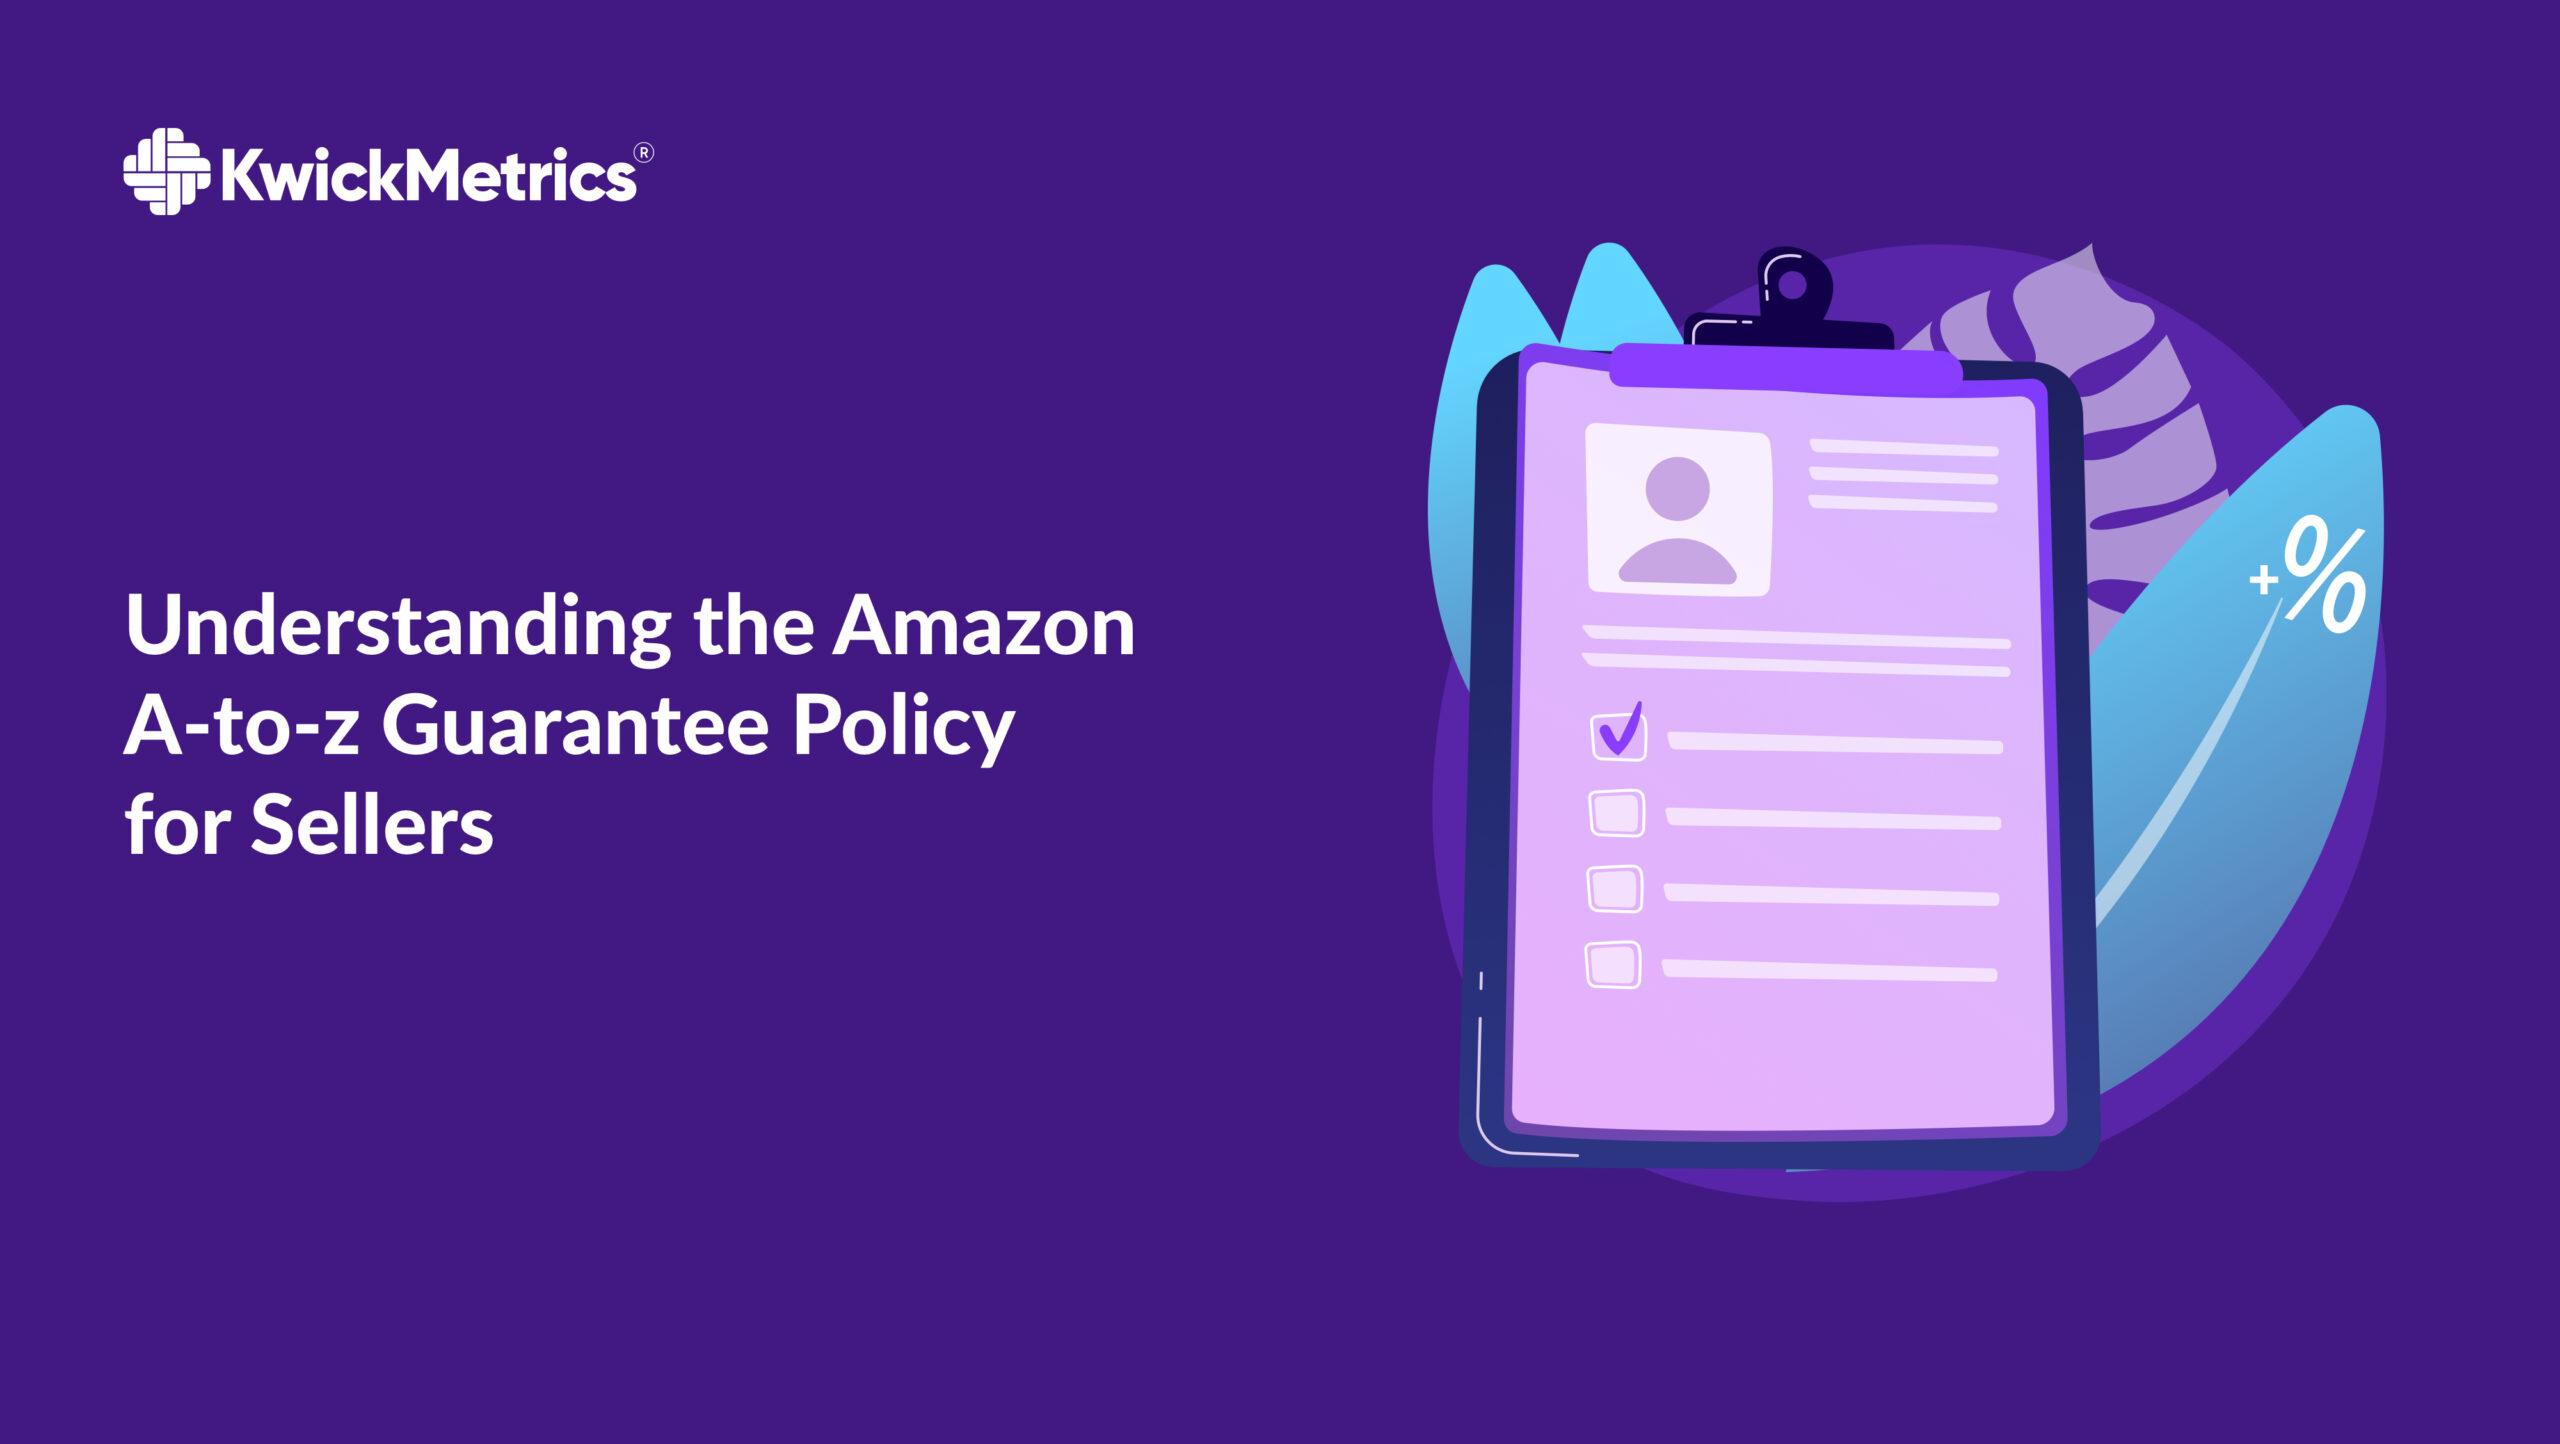 Understanding the Amazon A-to-z Guarantee Policy for Sellers